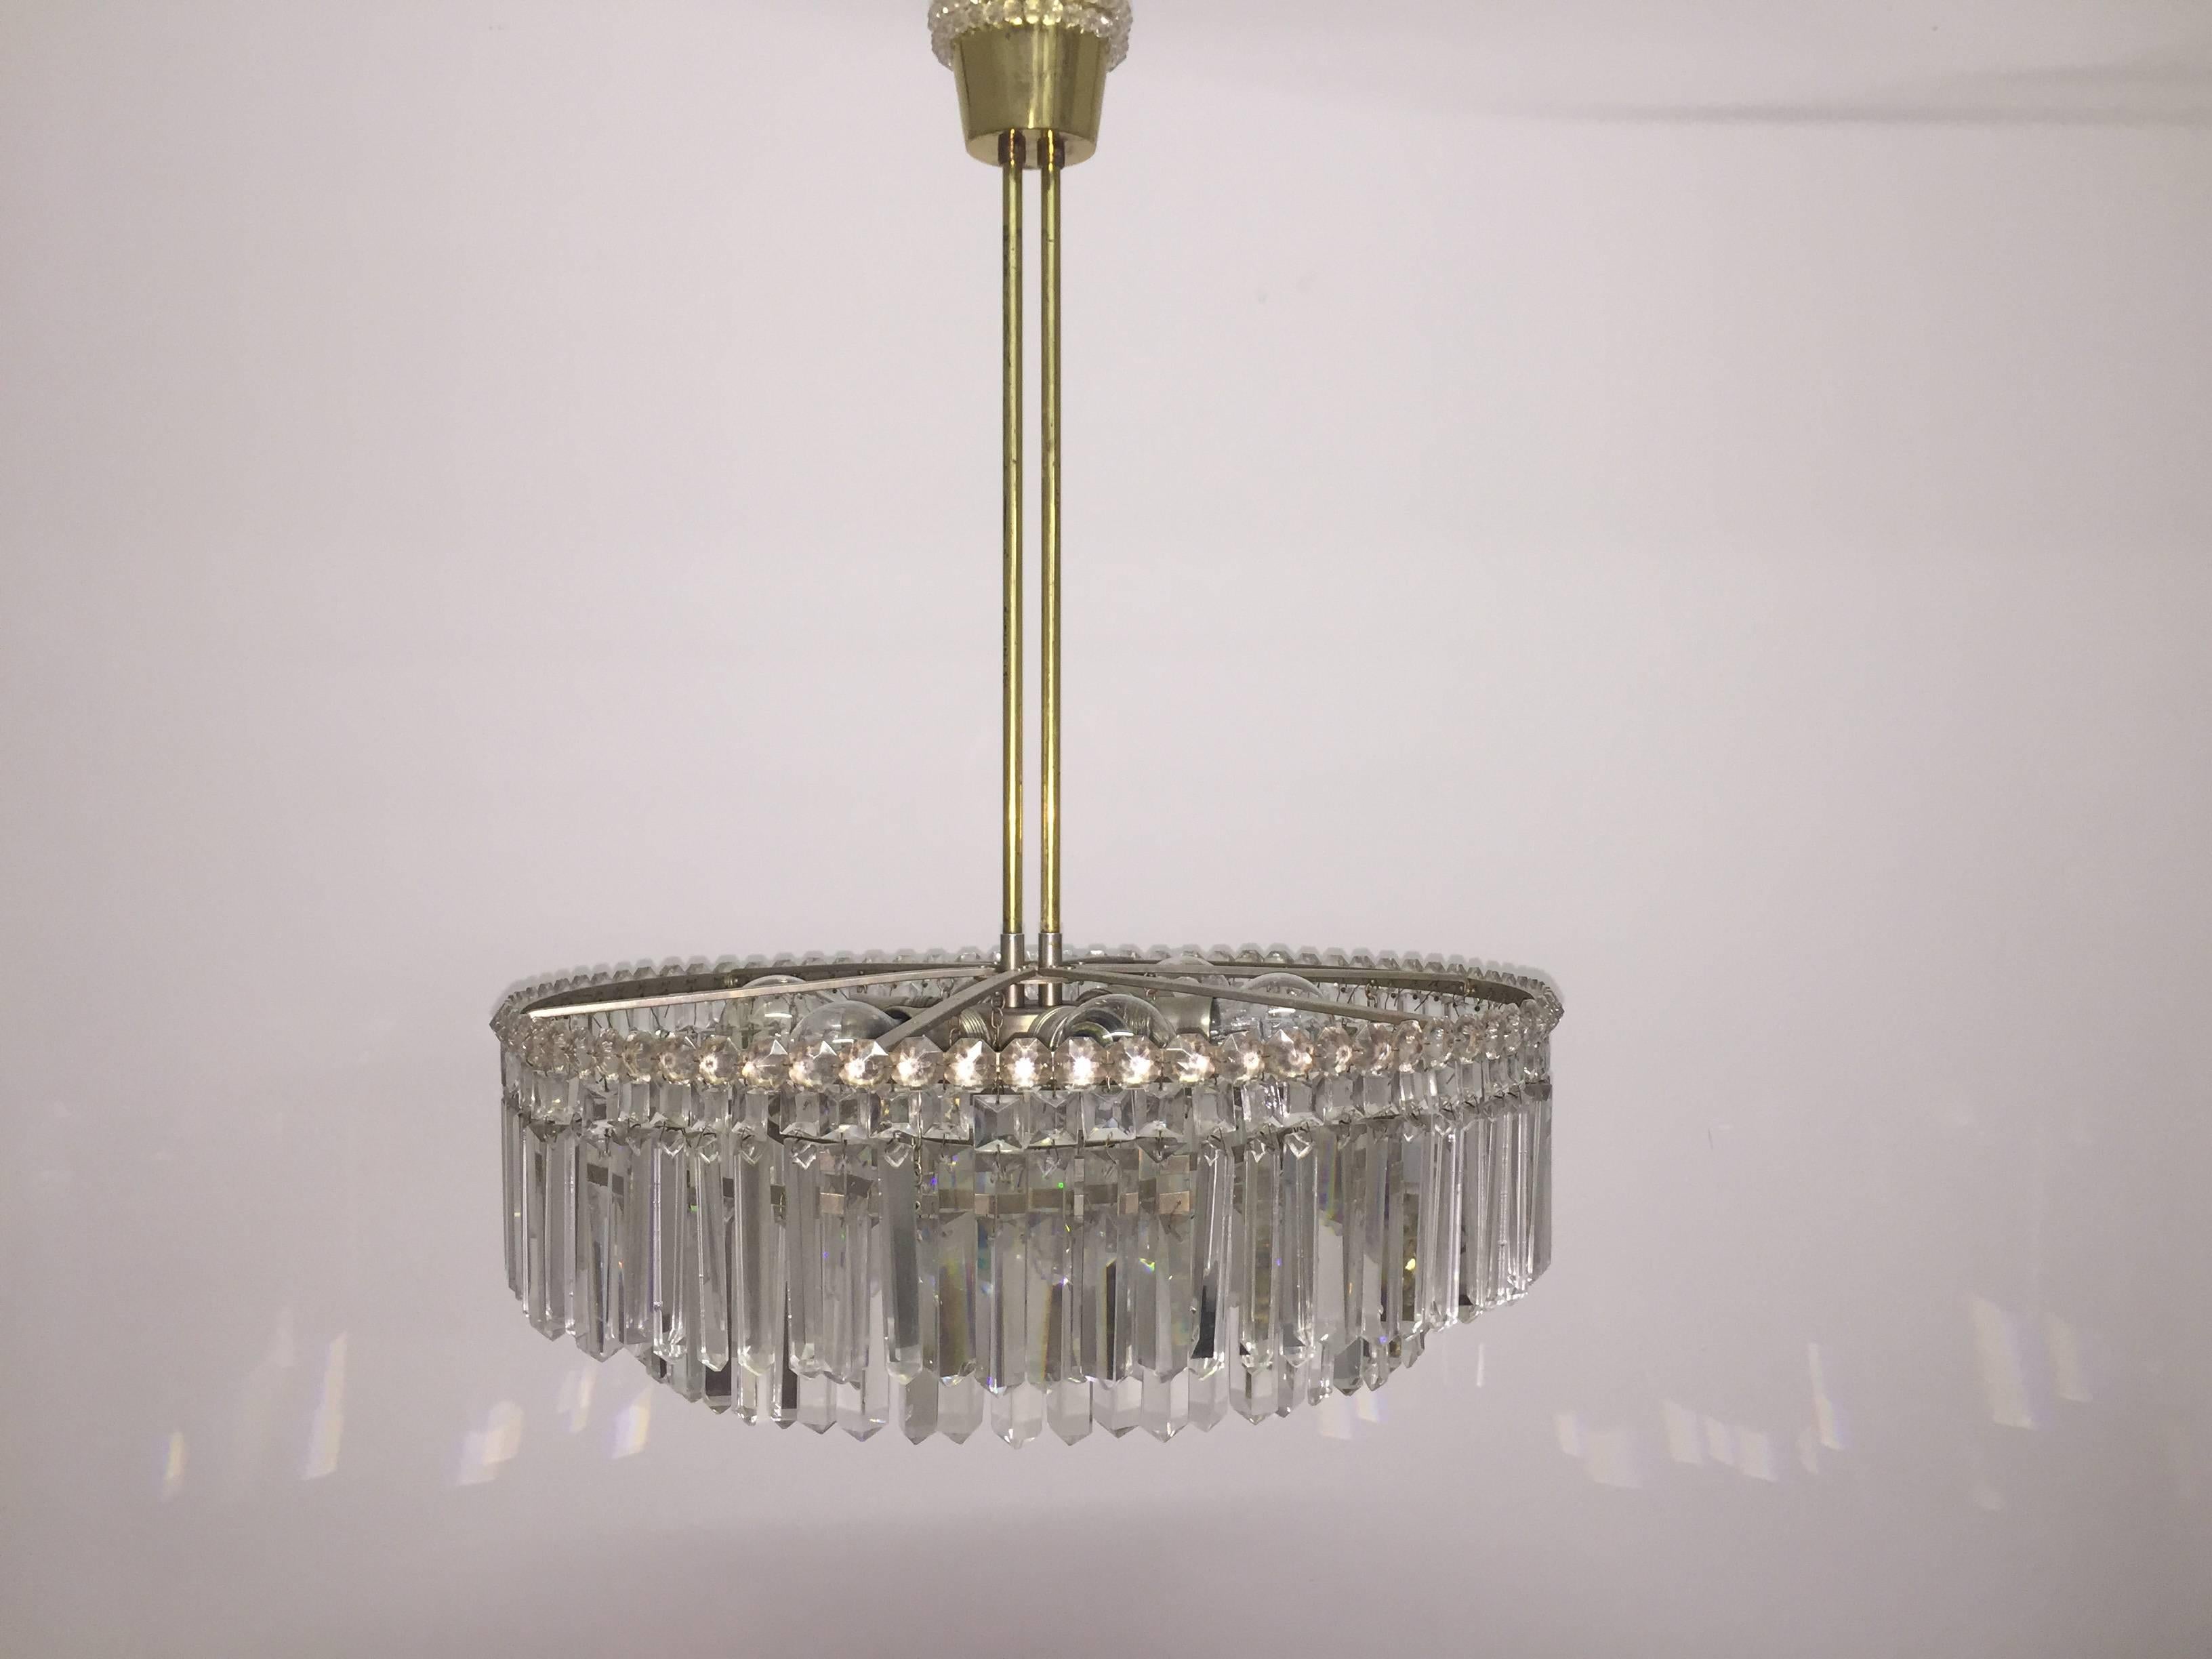 An austrian mid - century cut crystal and gilt brass six-light chandelier by Bakalowits & Soehne, circa 1960s.
Especially nice in detail, edged with crystal elements.
Socket: Six x Edison (e27) for standard screw bulbs.
Excellent condition.
 